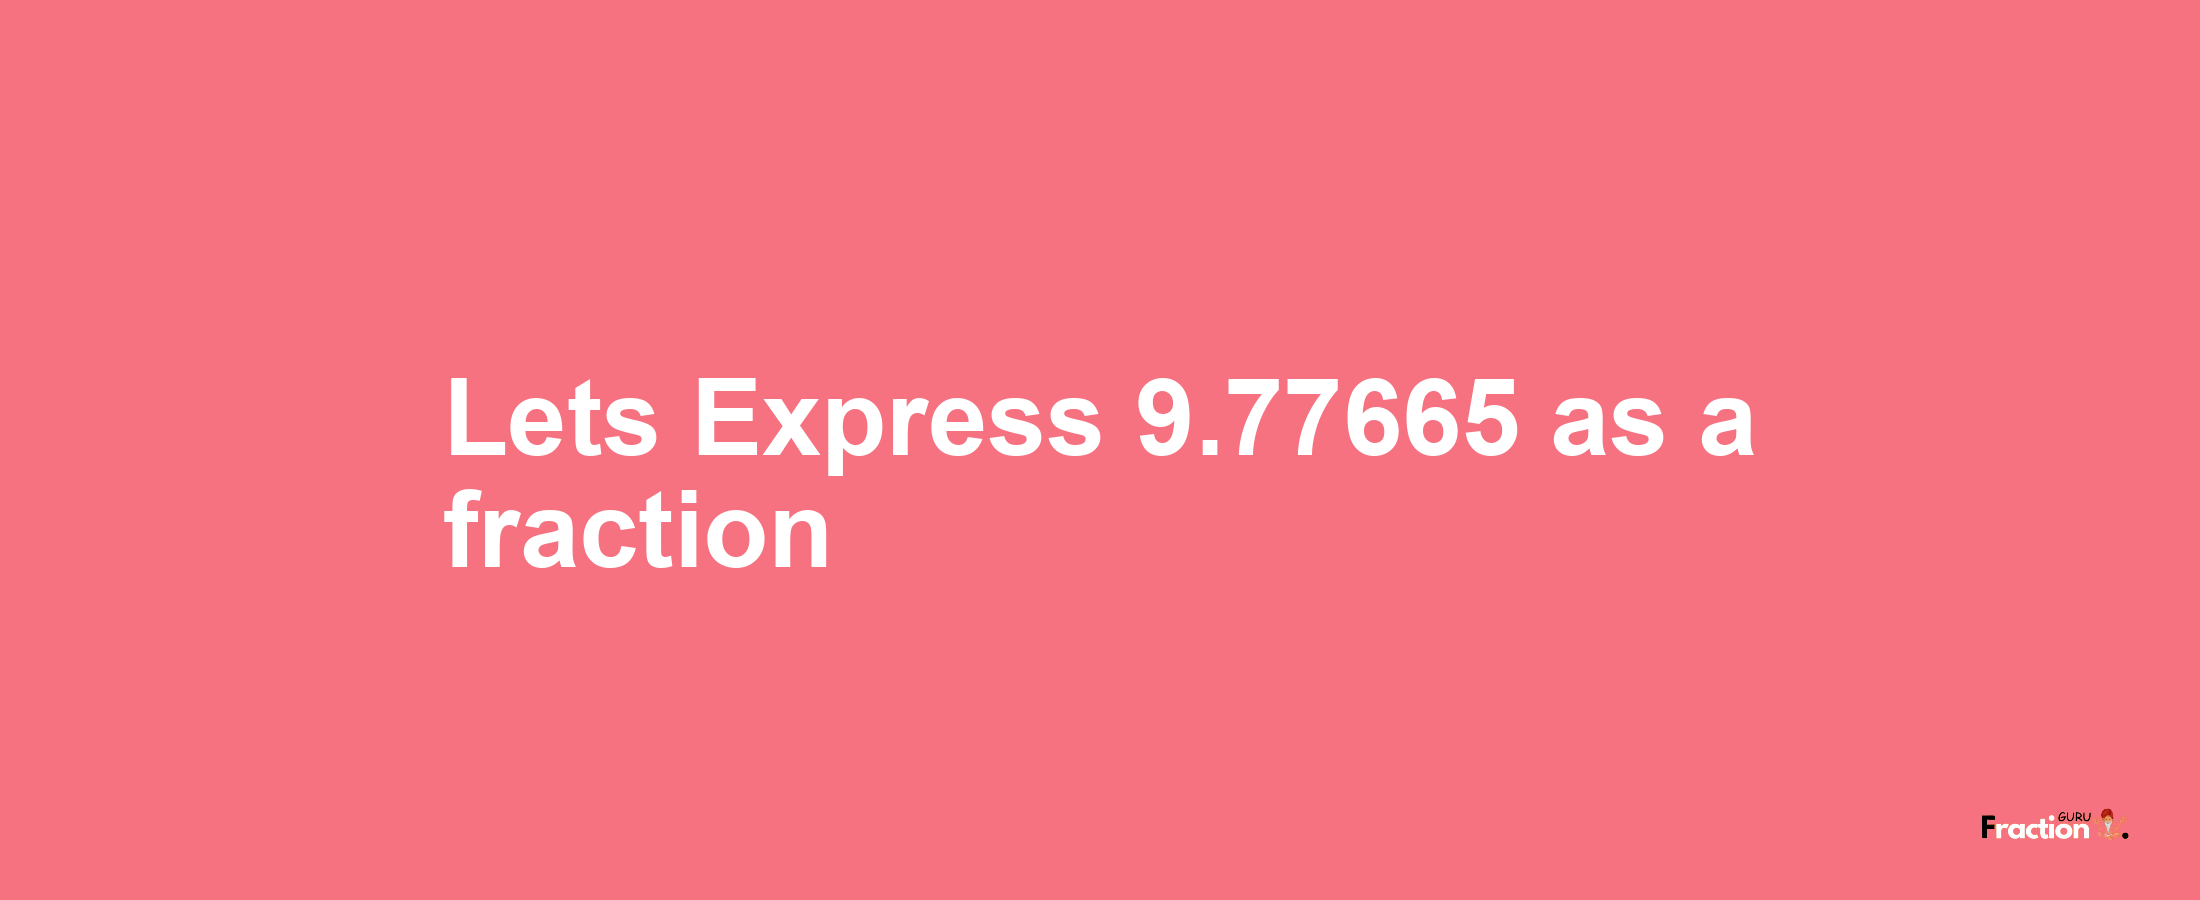 Lets Express 9.77665 as afraction